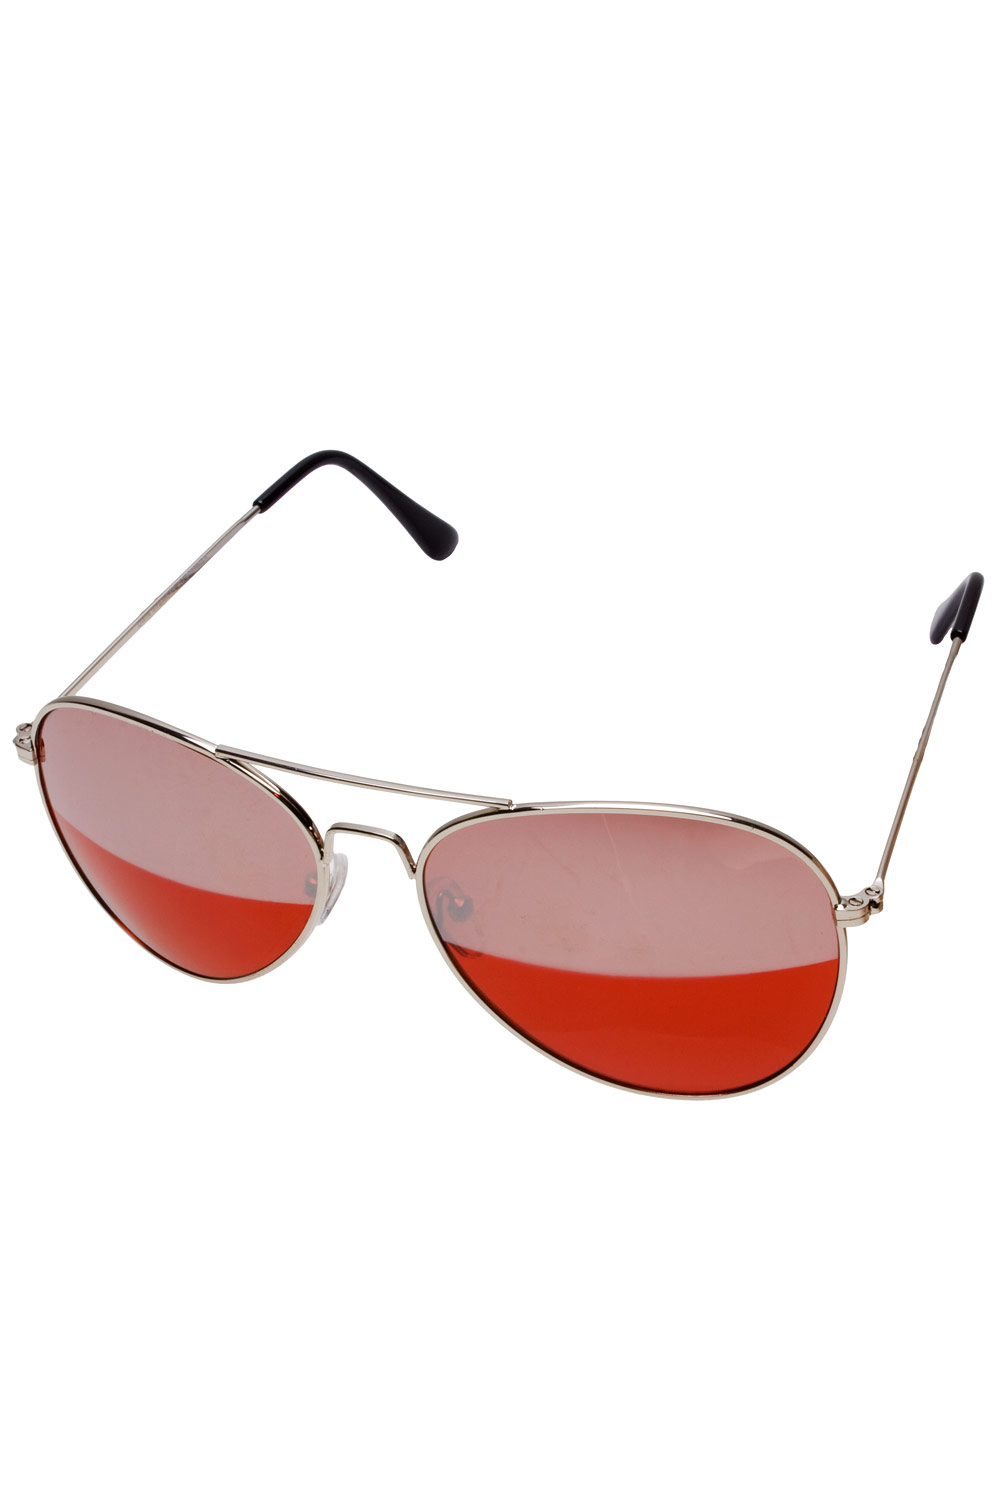 QWIN by TANAMY sun glasses at oboy.com